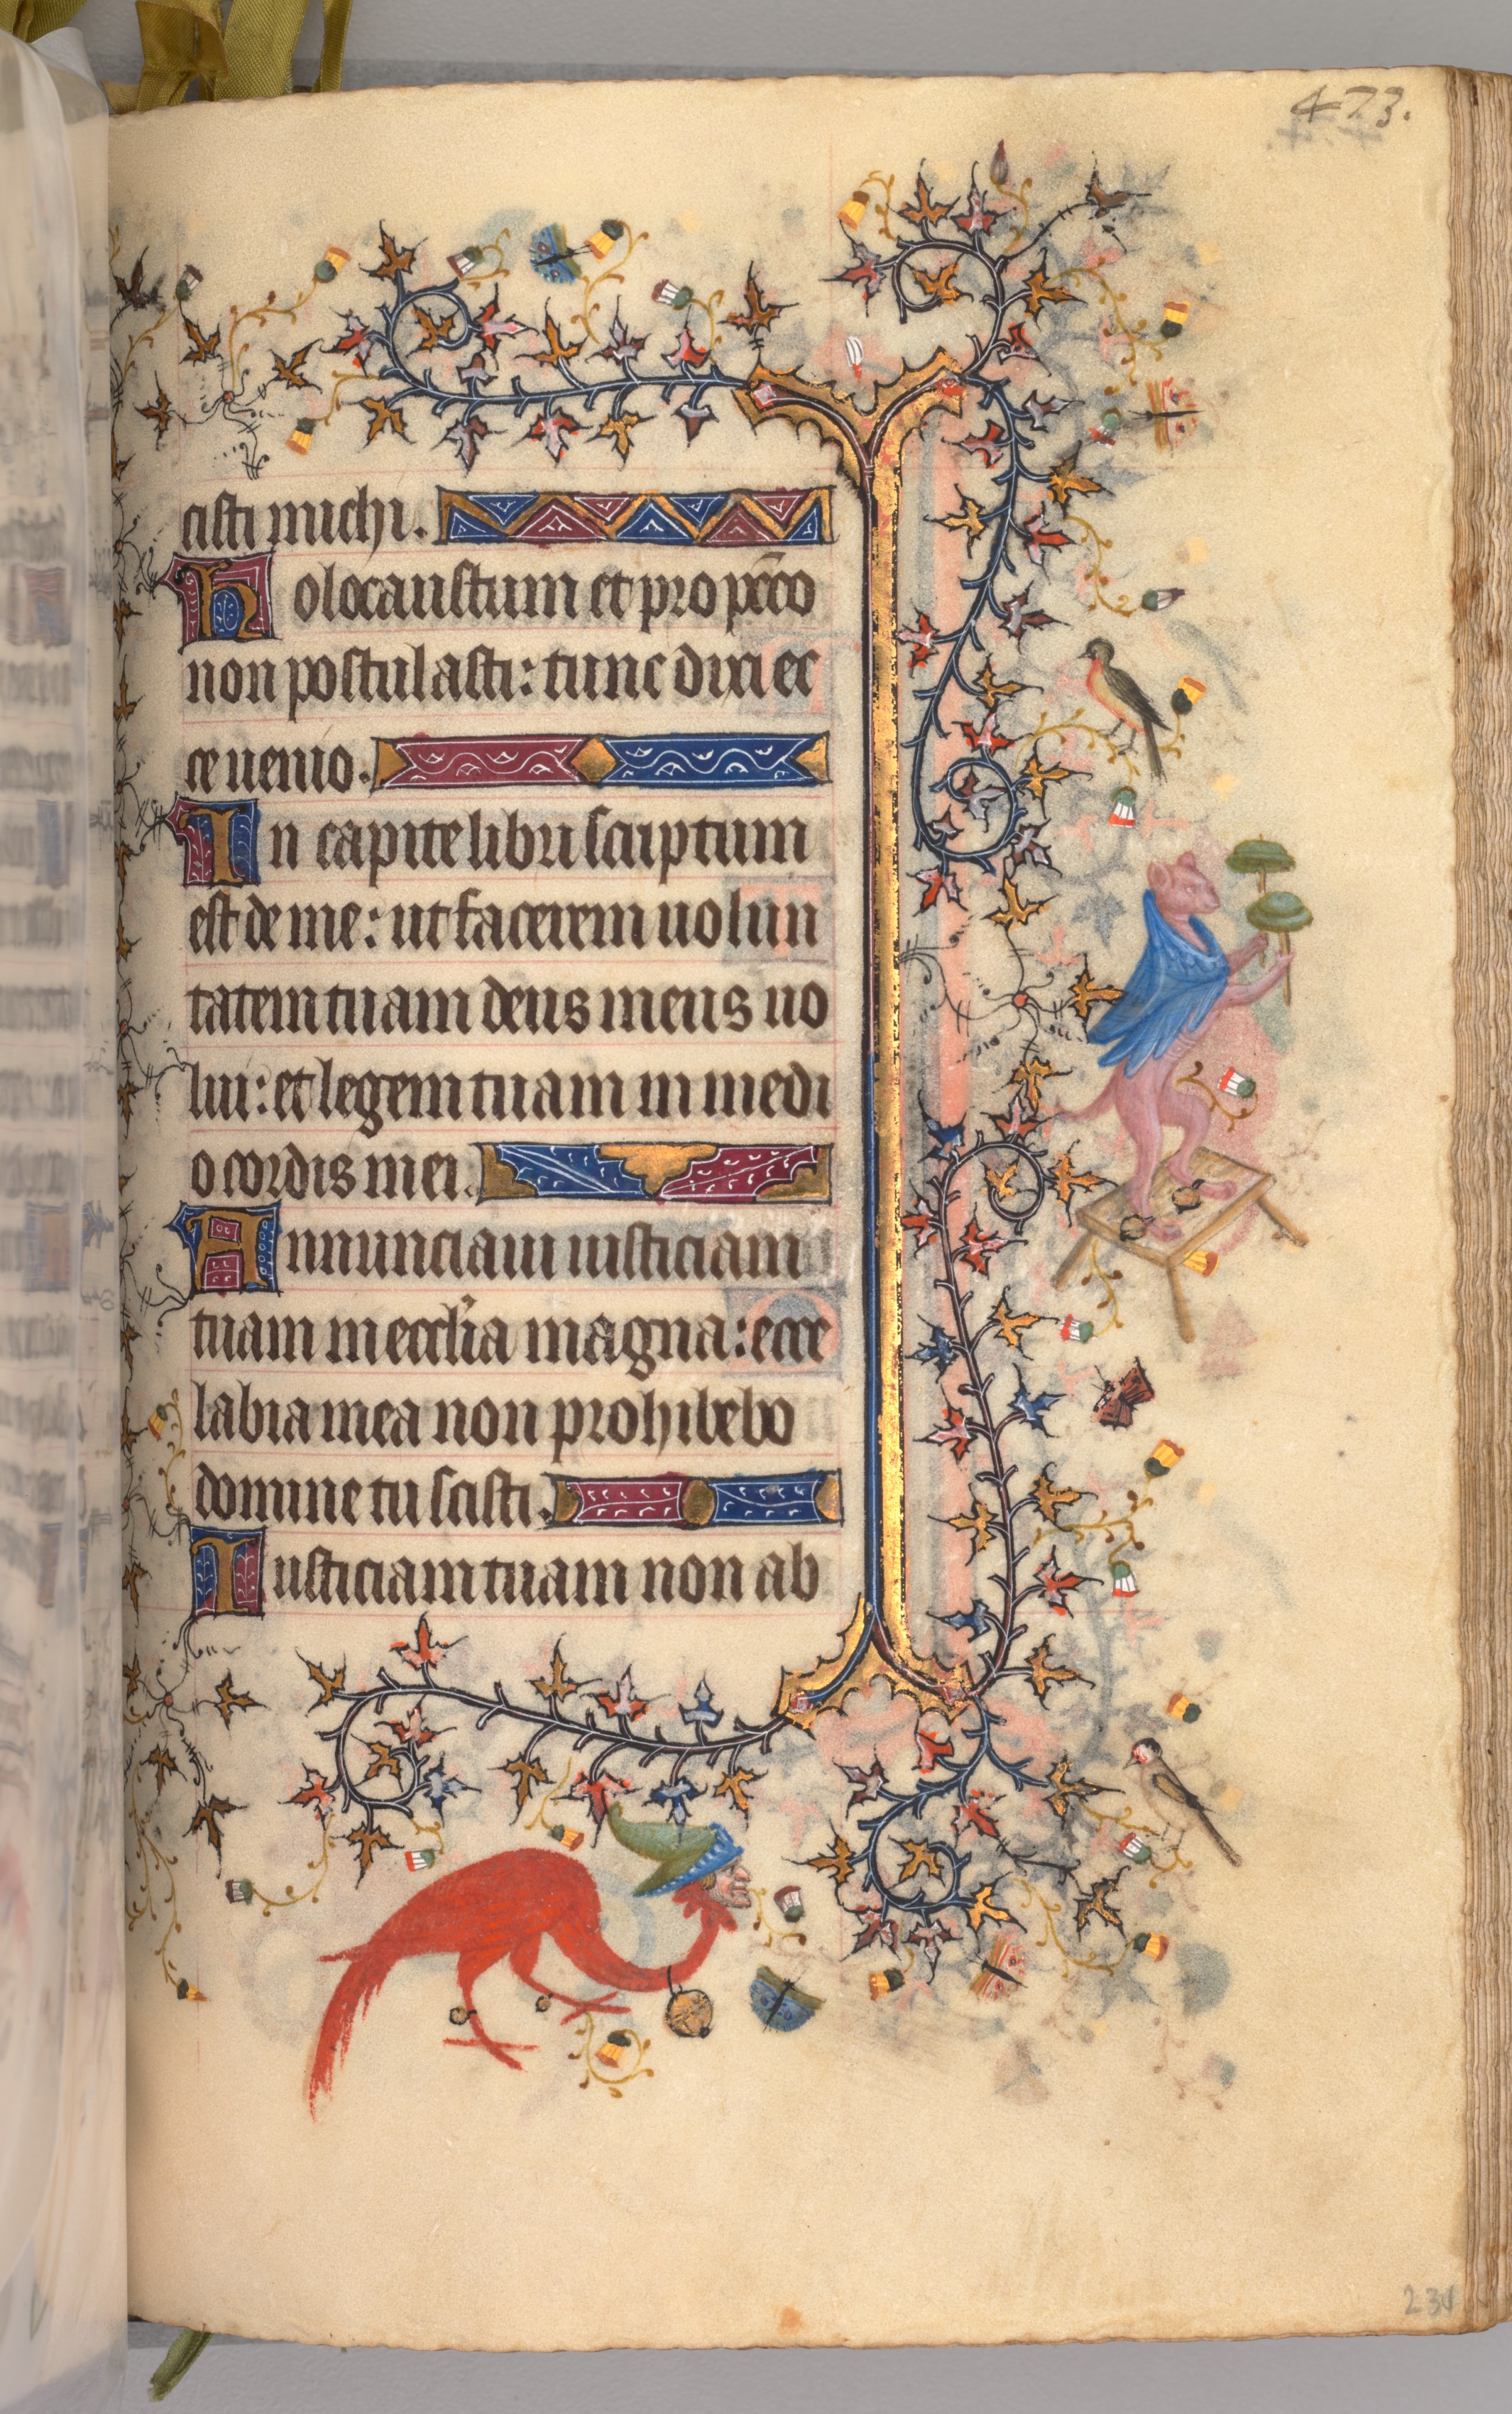 Hours of Charles the Noble, King of Navarre (1361-1425): fol. 231r, Text